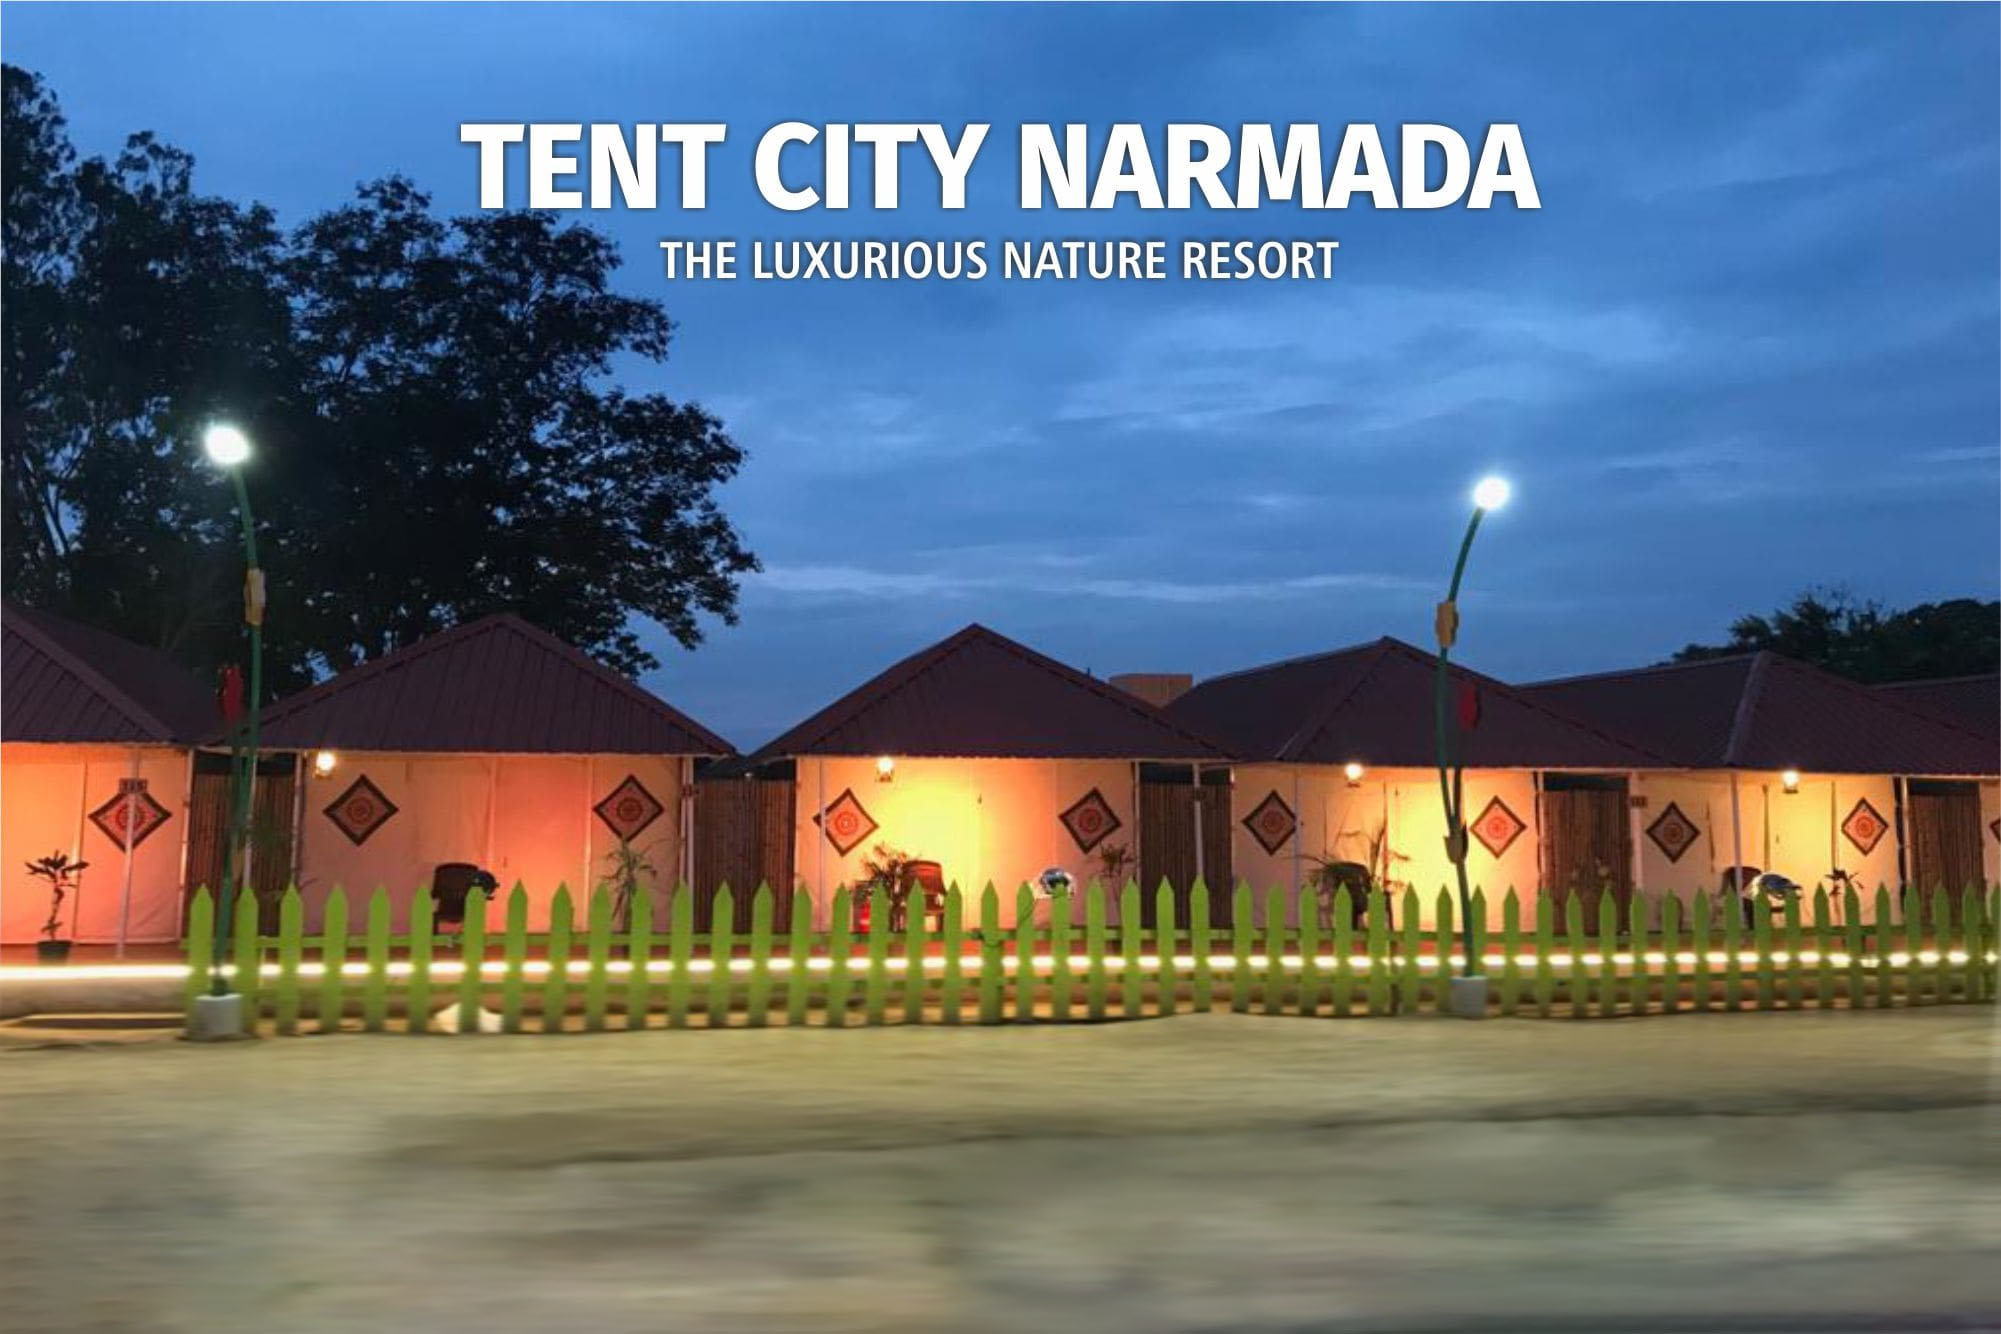 <span  class="uc_style_uc_tiles_grid_image_elementor_uc_items_attribute_title" style="color:#ffffff;">Tent City Narmada Luxurious Resort </span>